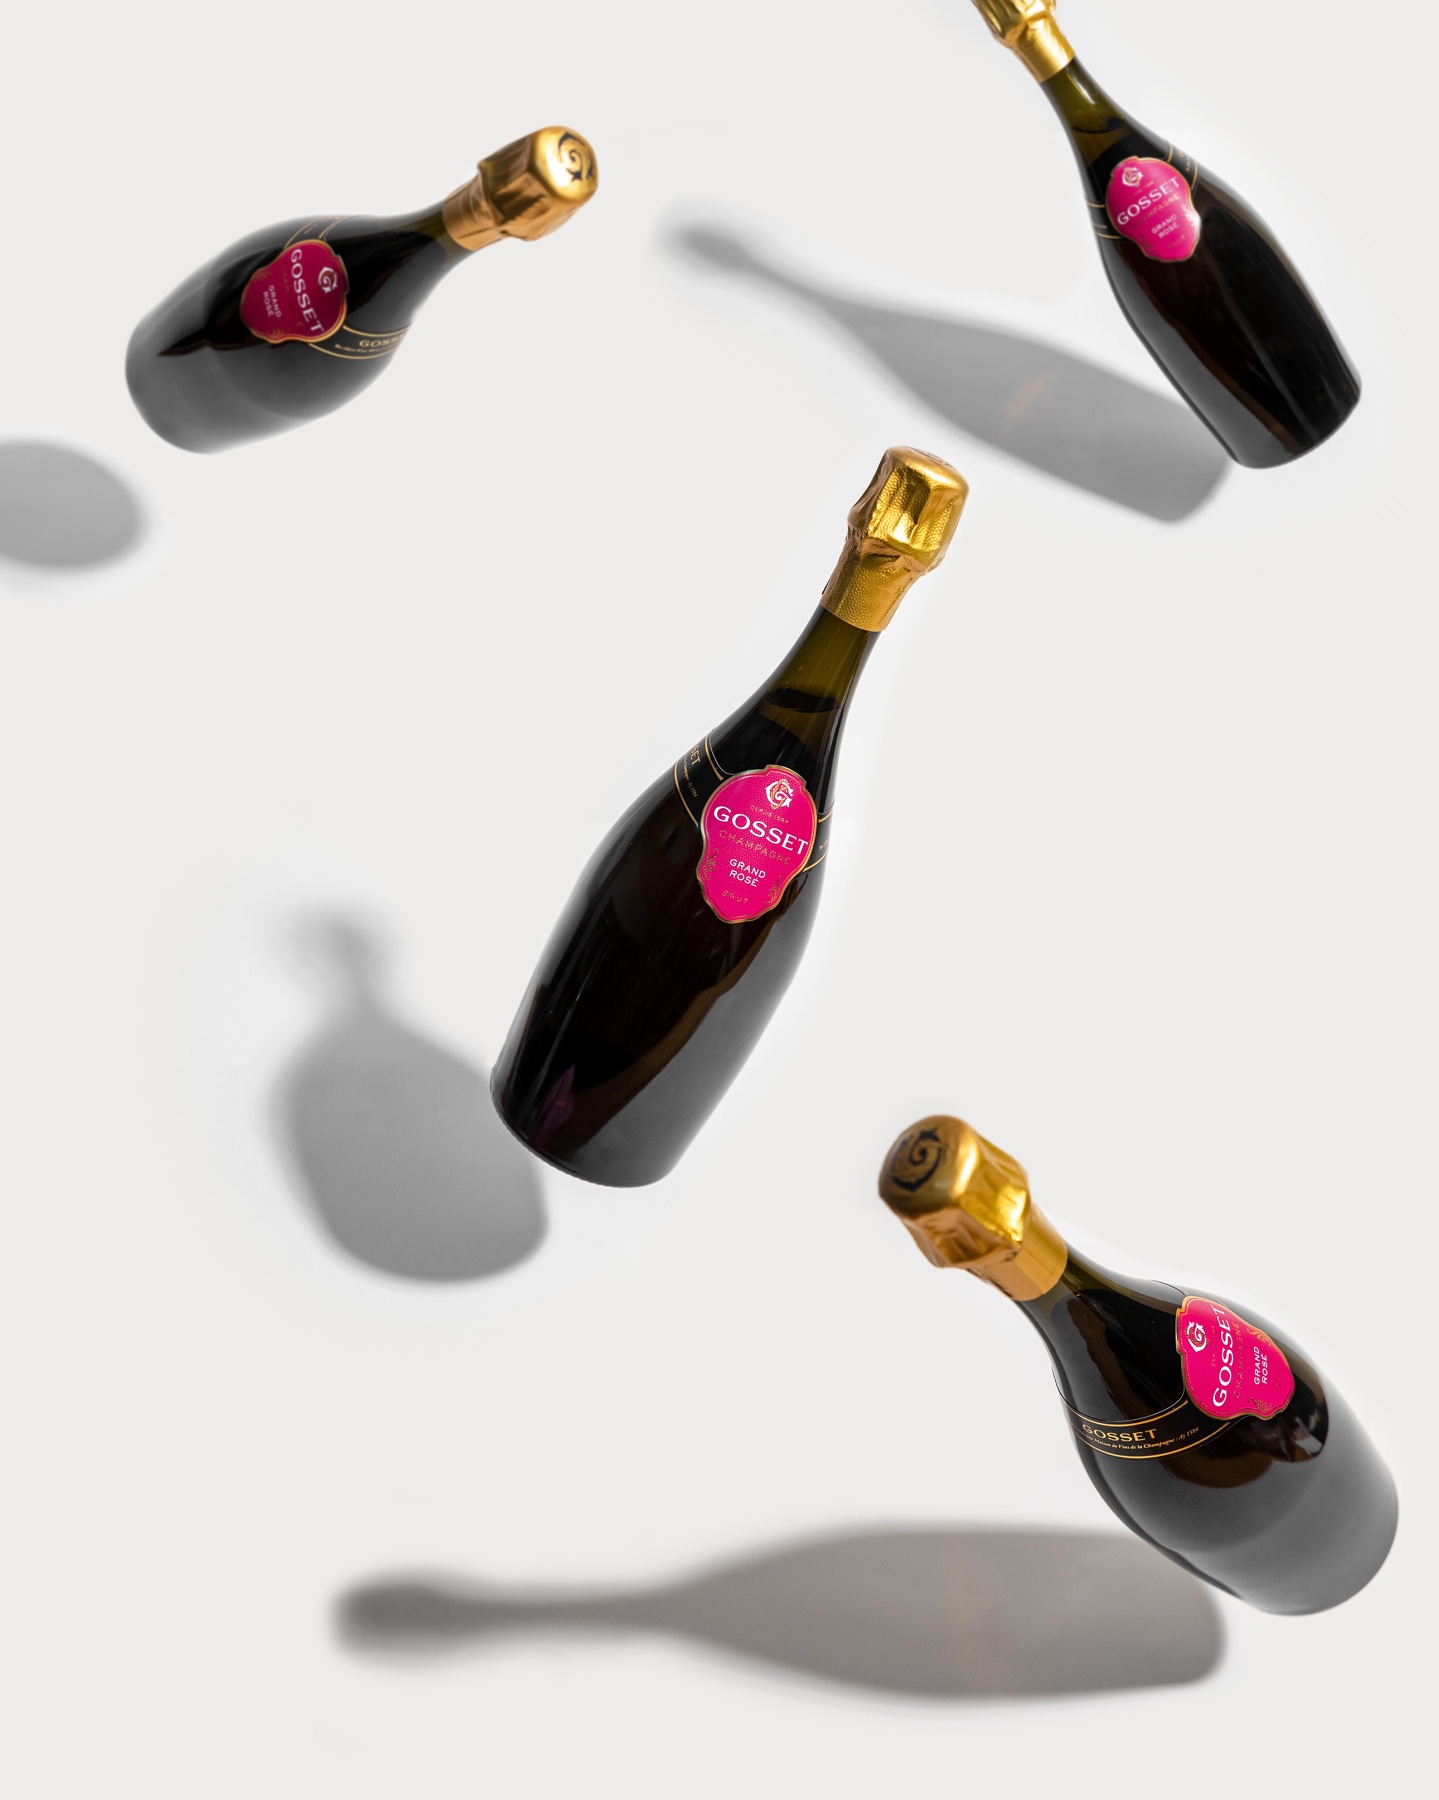 Gosset Grand Rosé, a cuvée elaborated in the traditions of the House